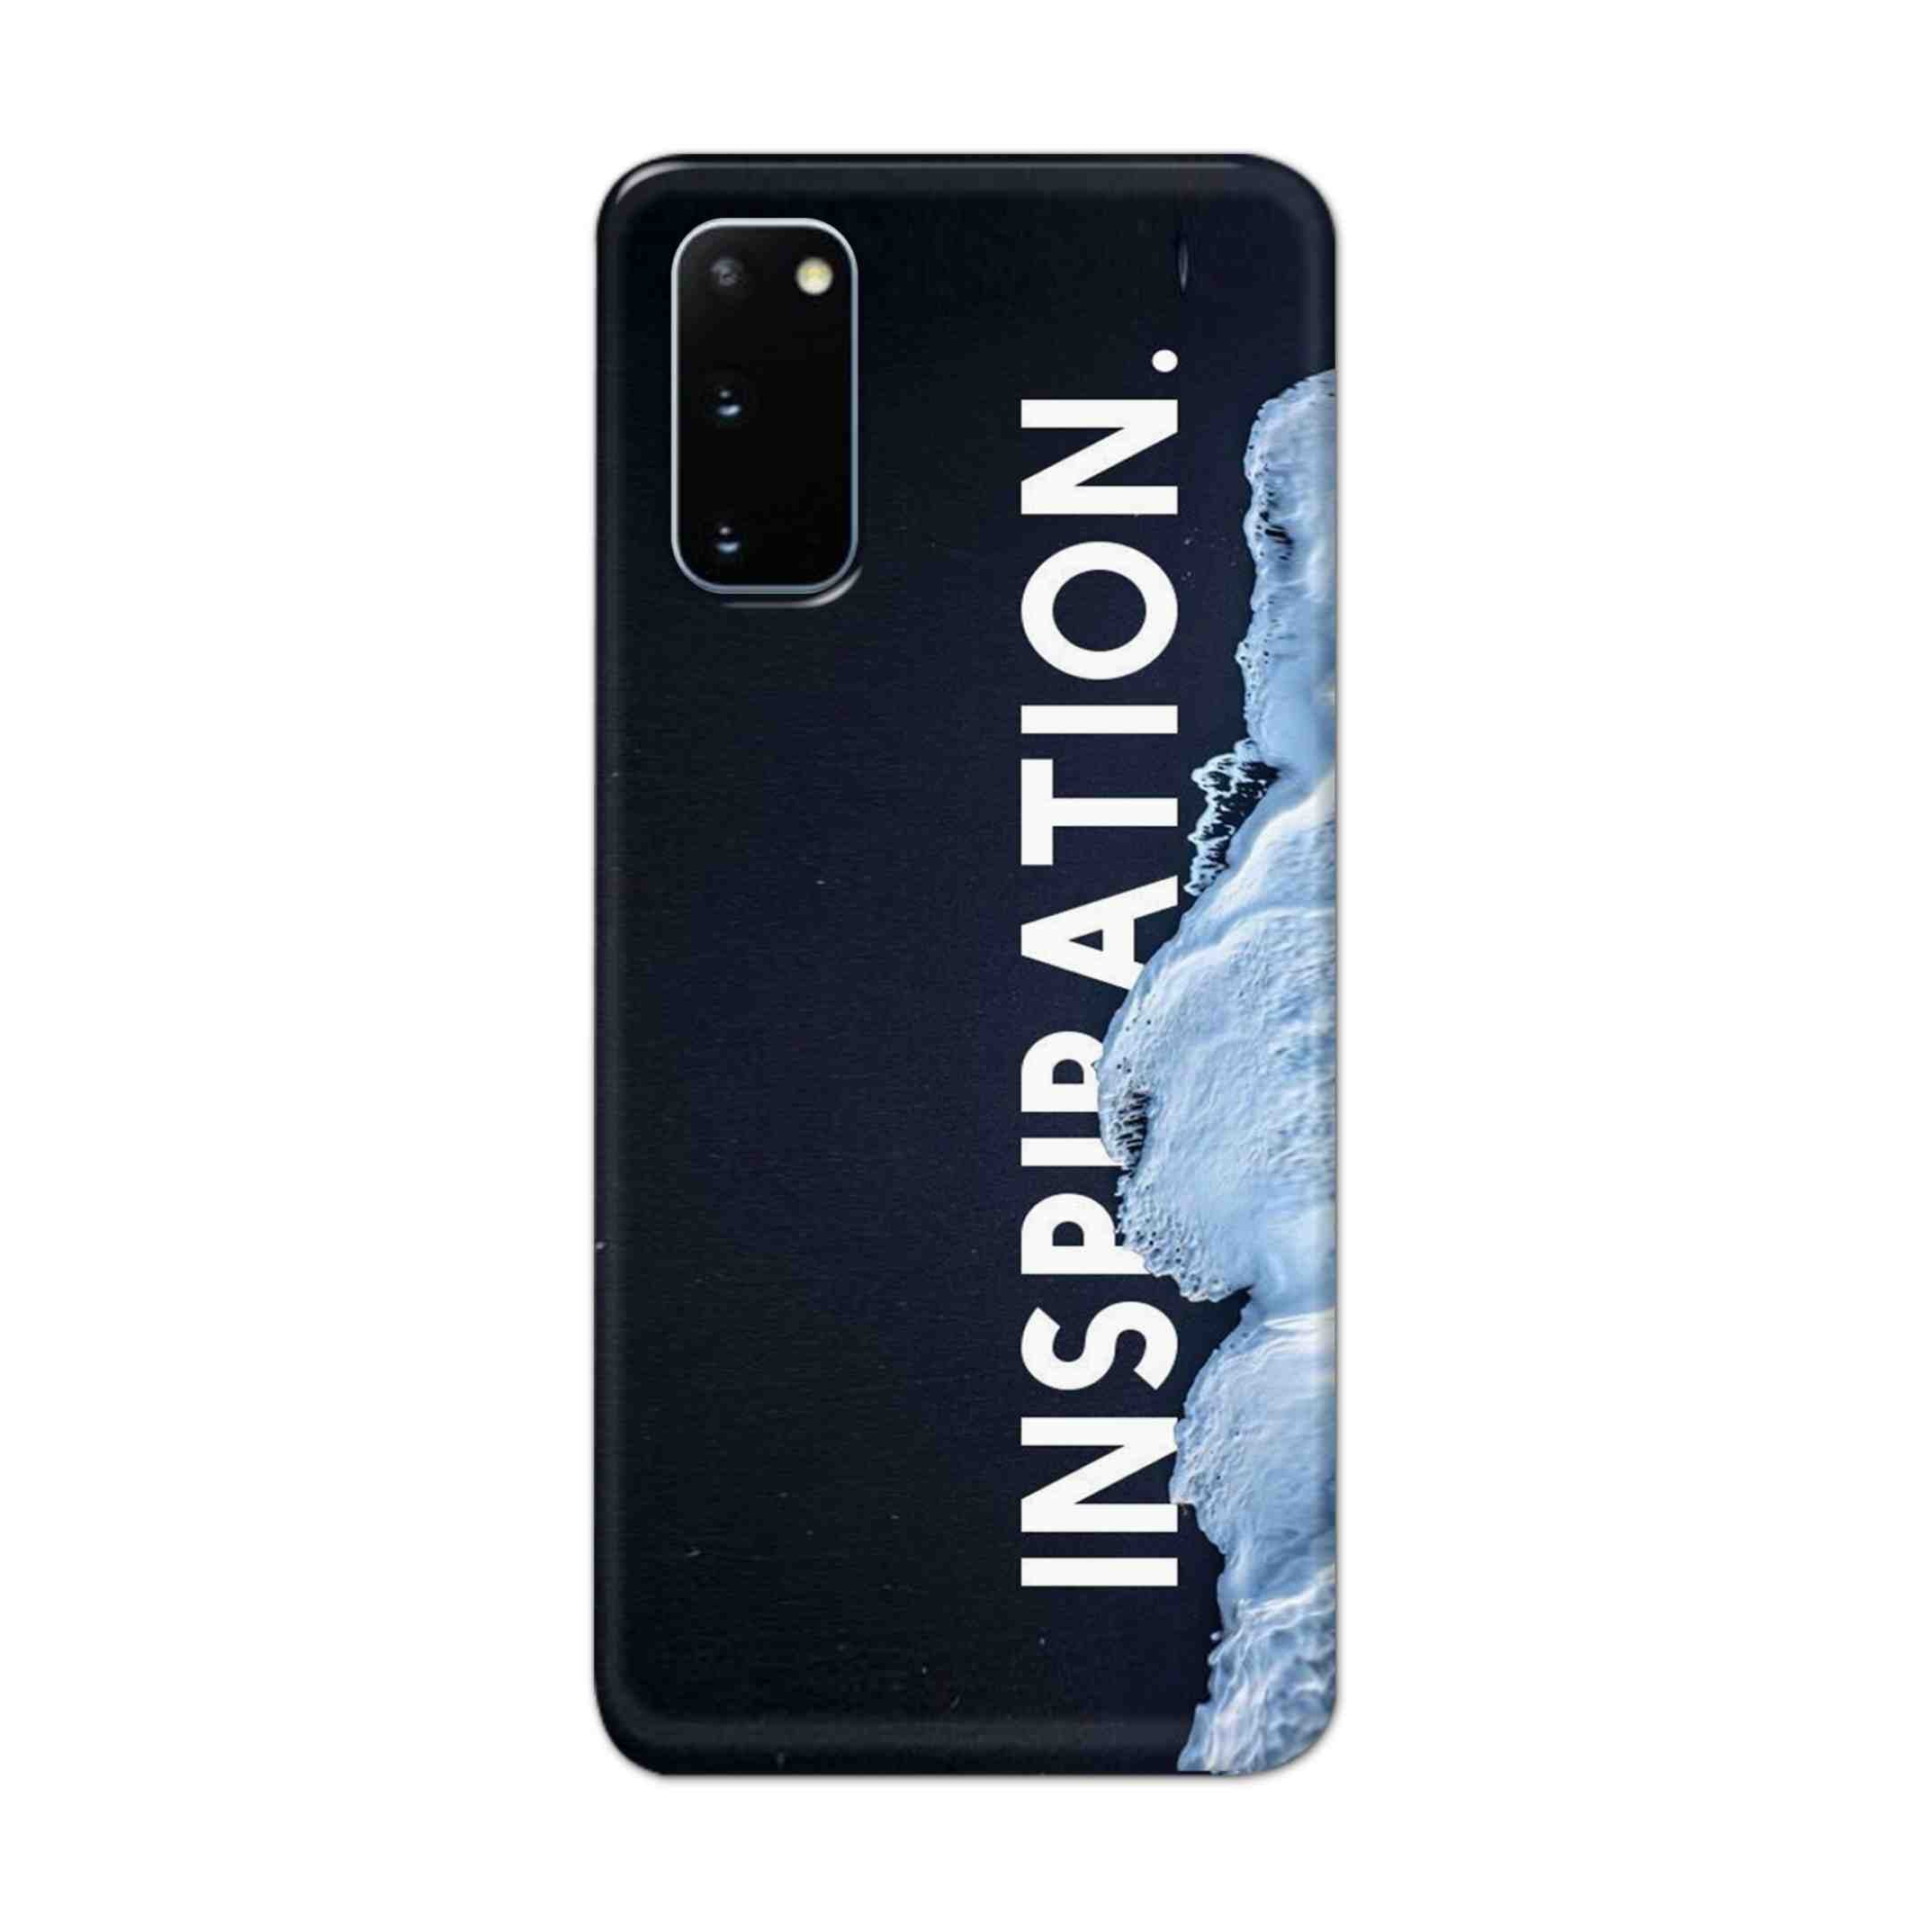 Buy Inspiration Hard Back Mobile Phone Case Cover For Samsung Galaxy S20 Online